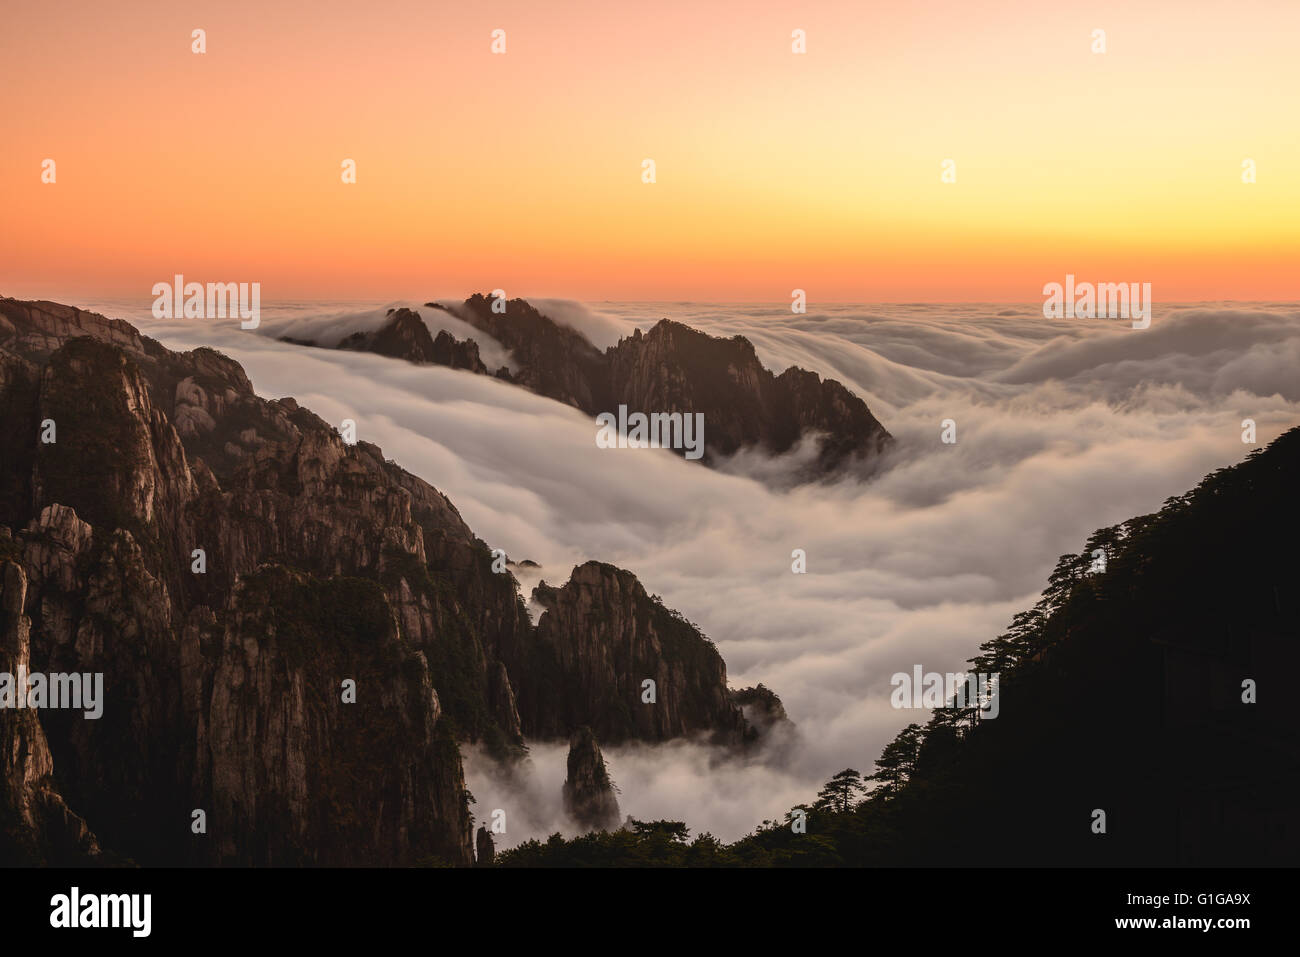 Epic sunset looking out west from the summit of Huangshan mountain Stock Photo